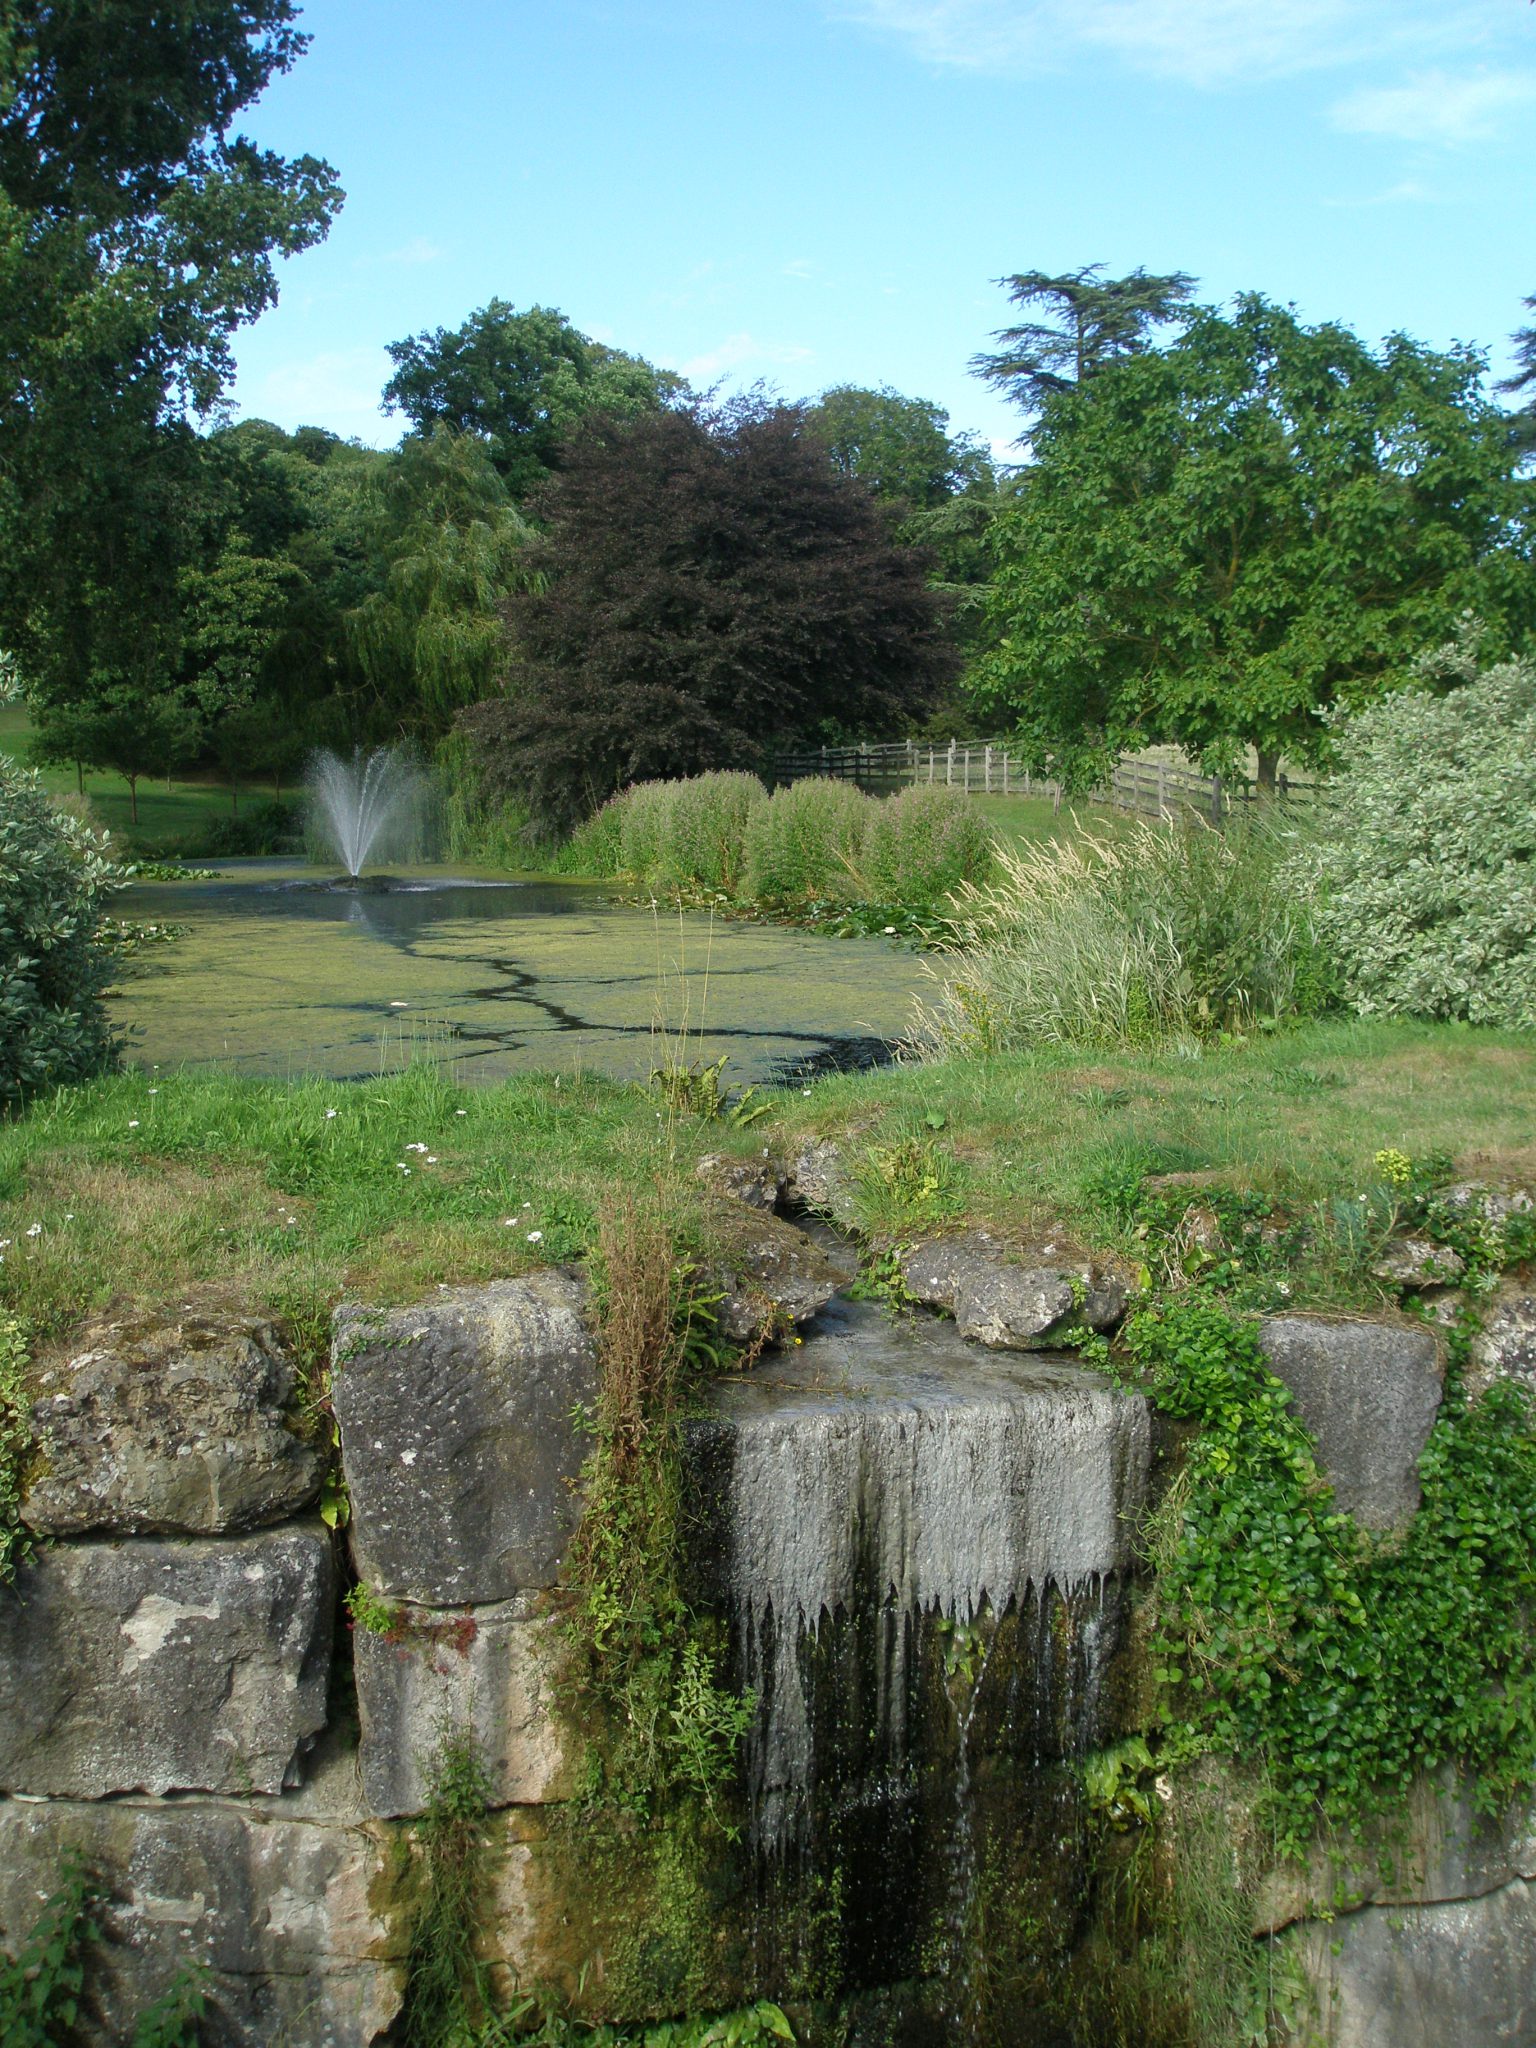 A High Cascade made of Bath Stone is at the end of the Top Lake